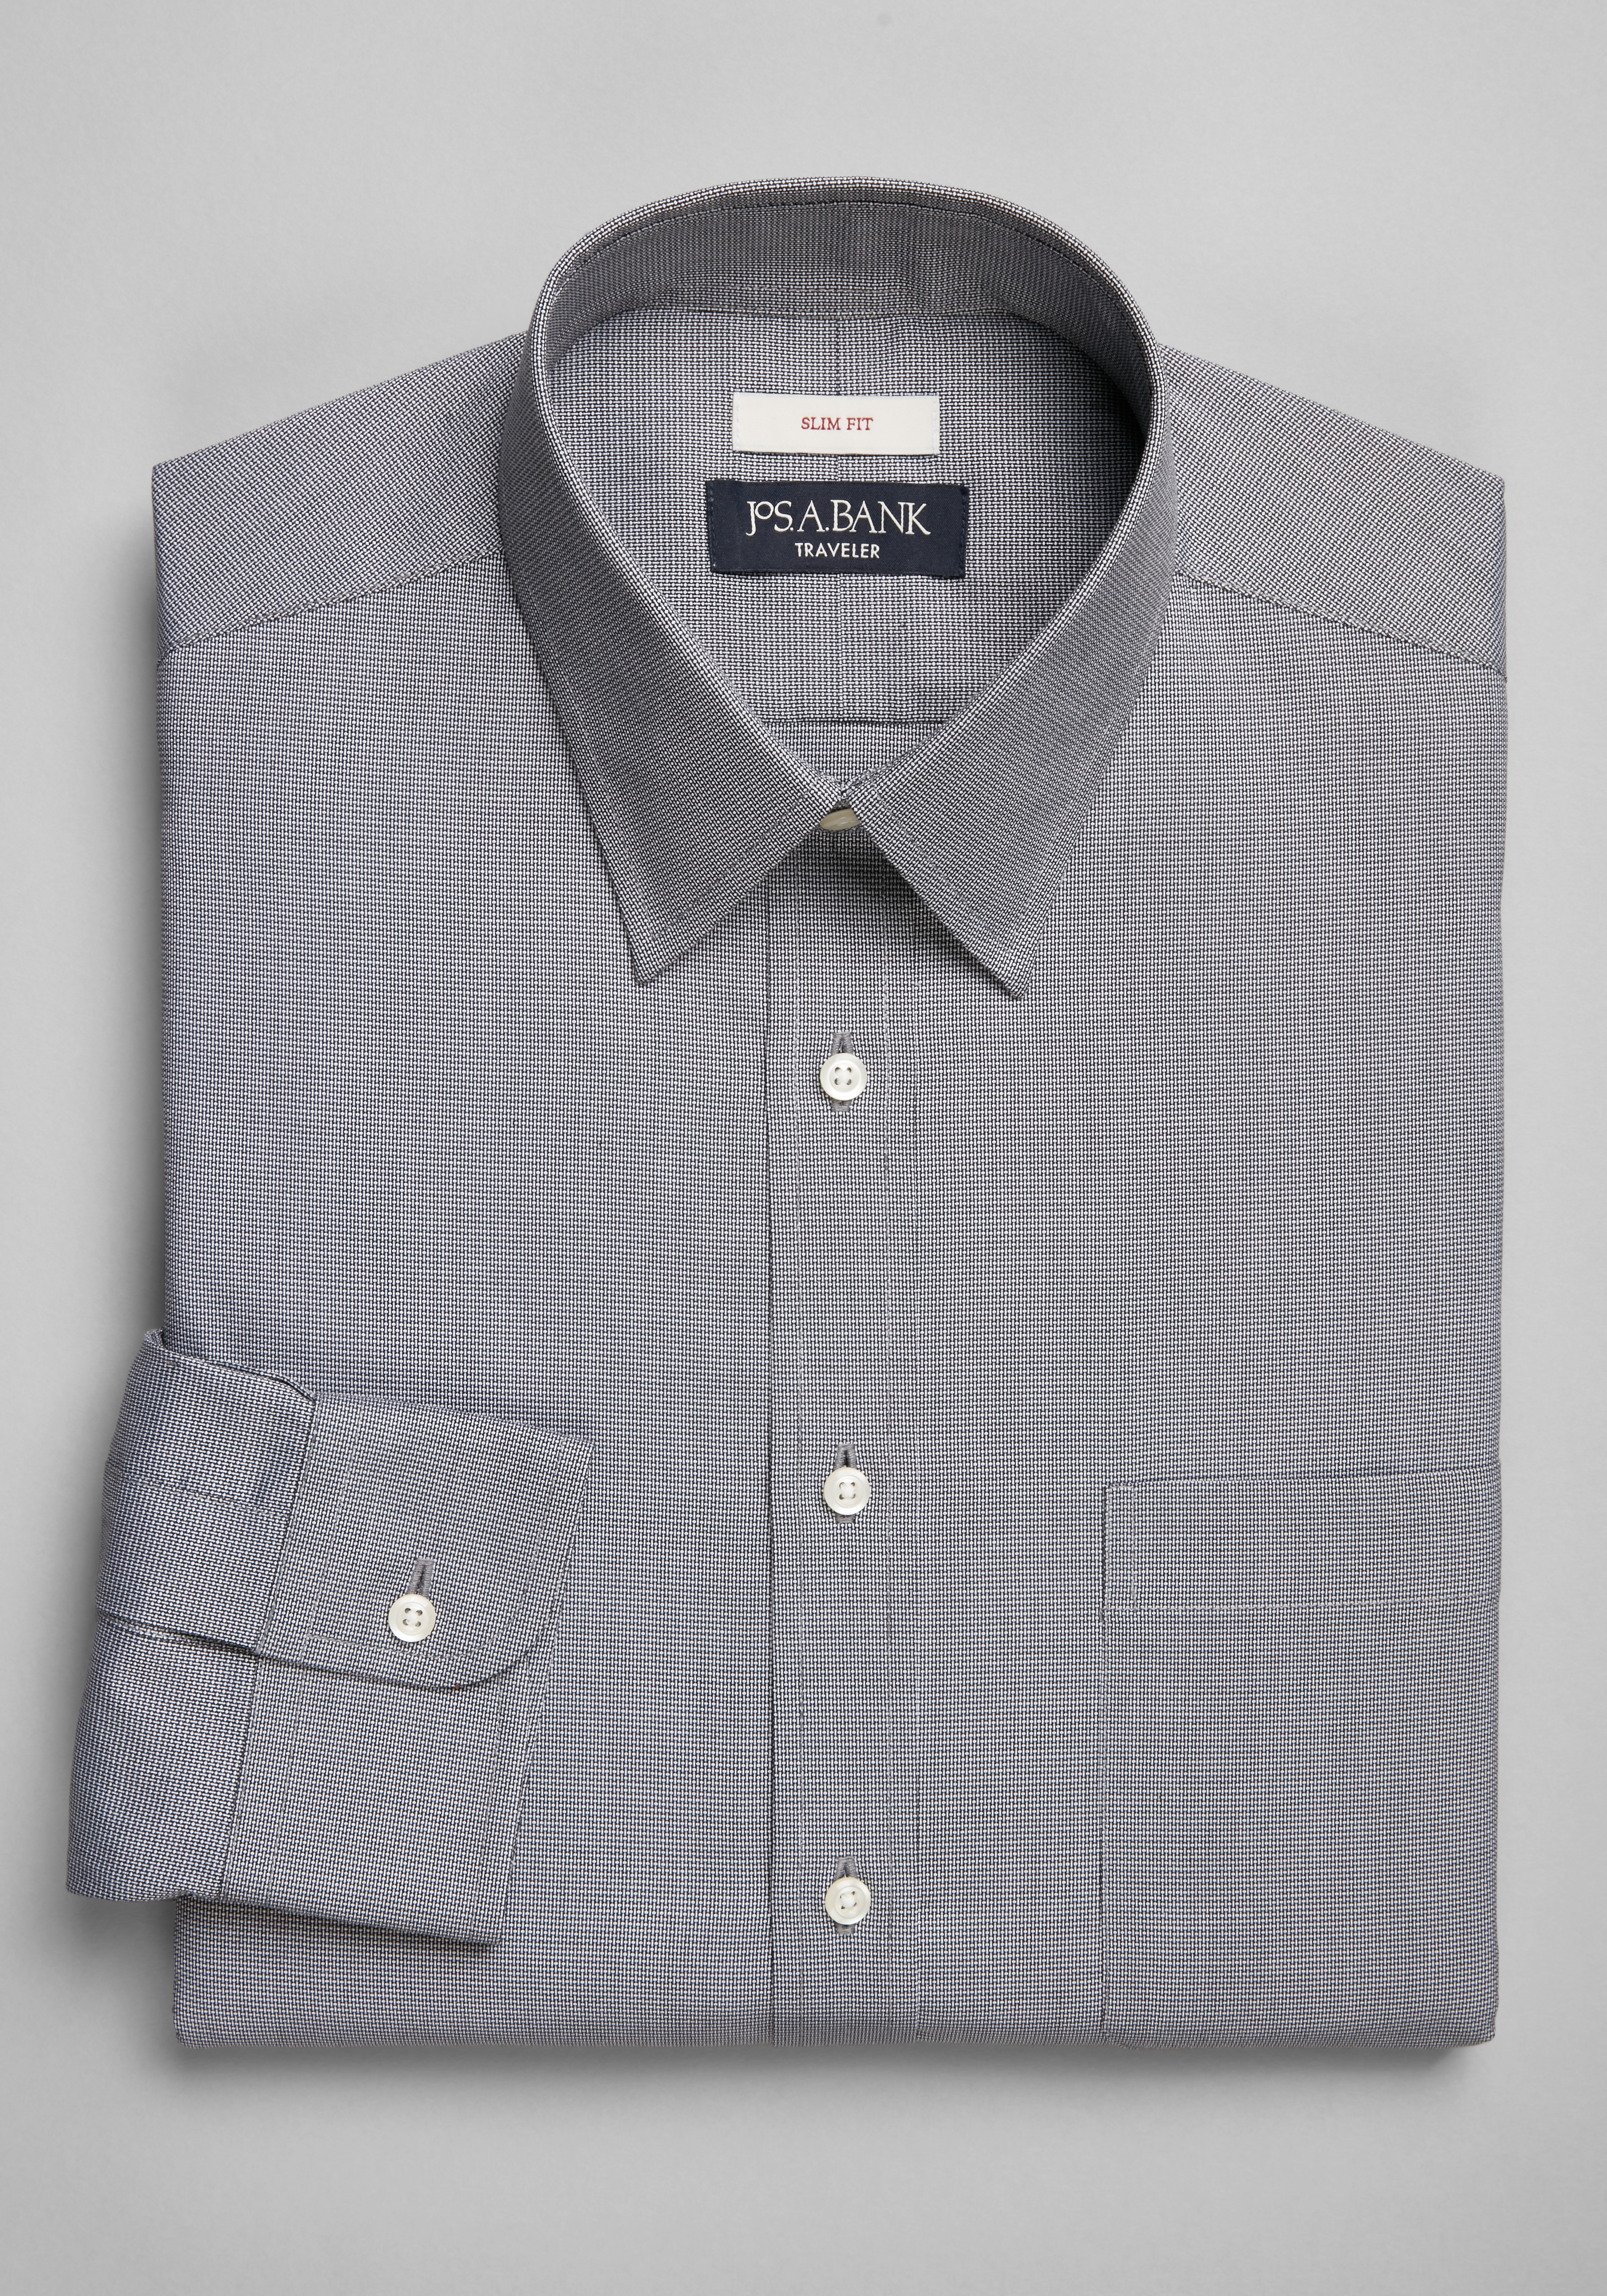 Traveler Collection Tailored Fit Dress Shirt CLEARANCE